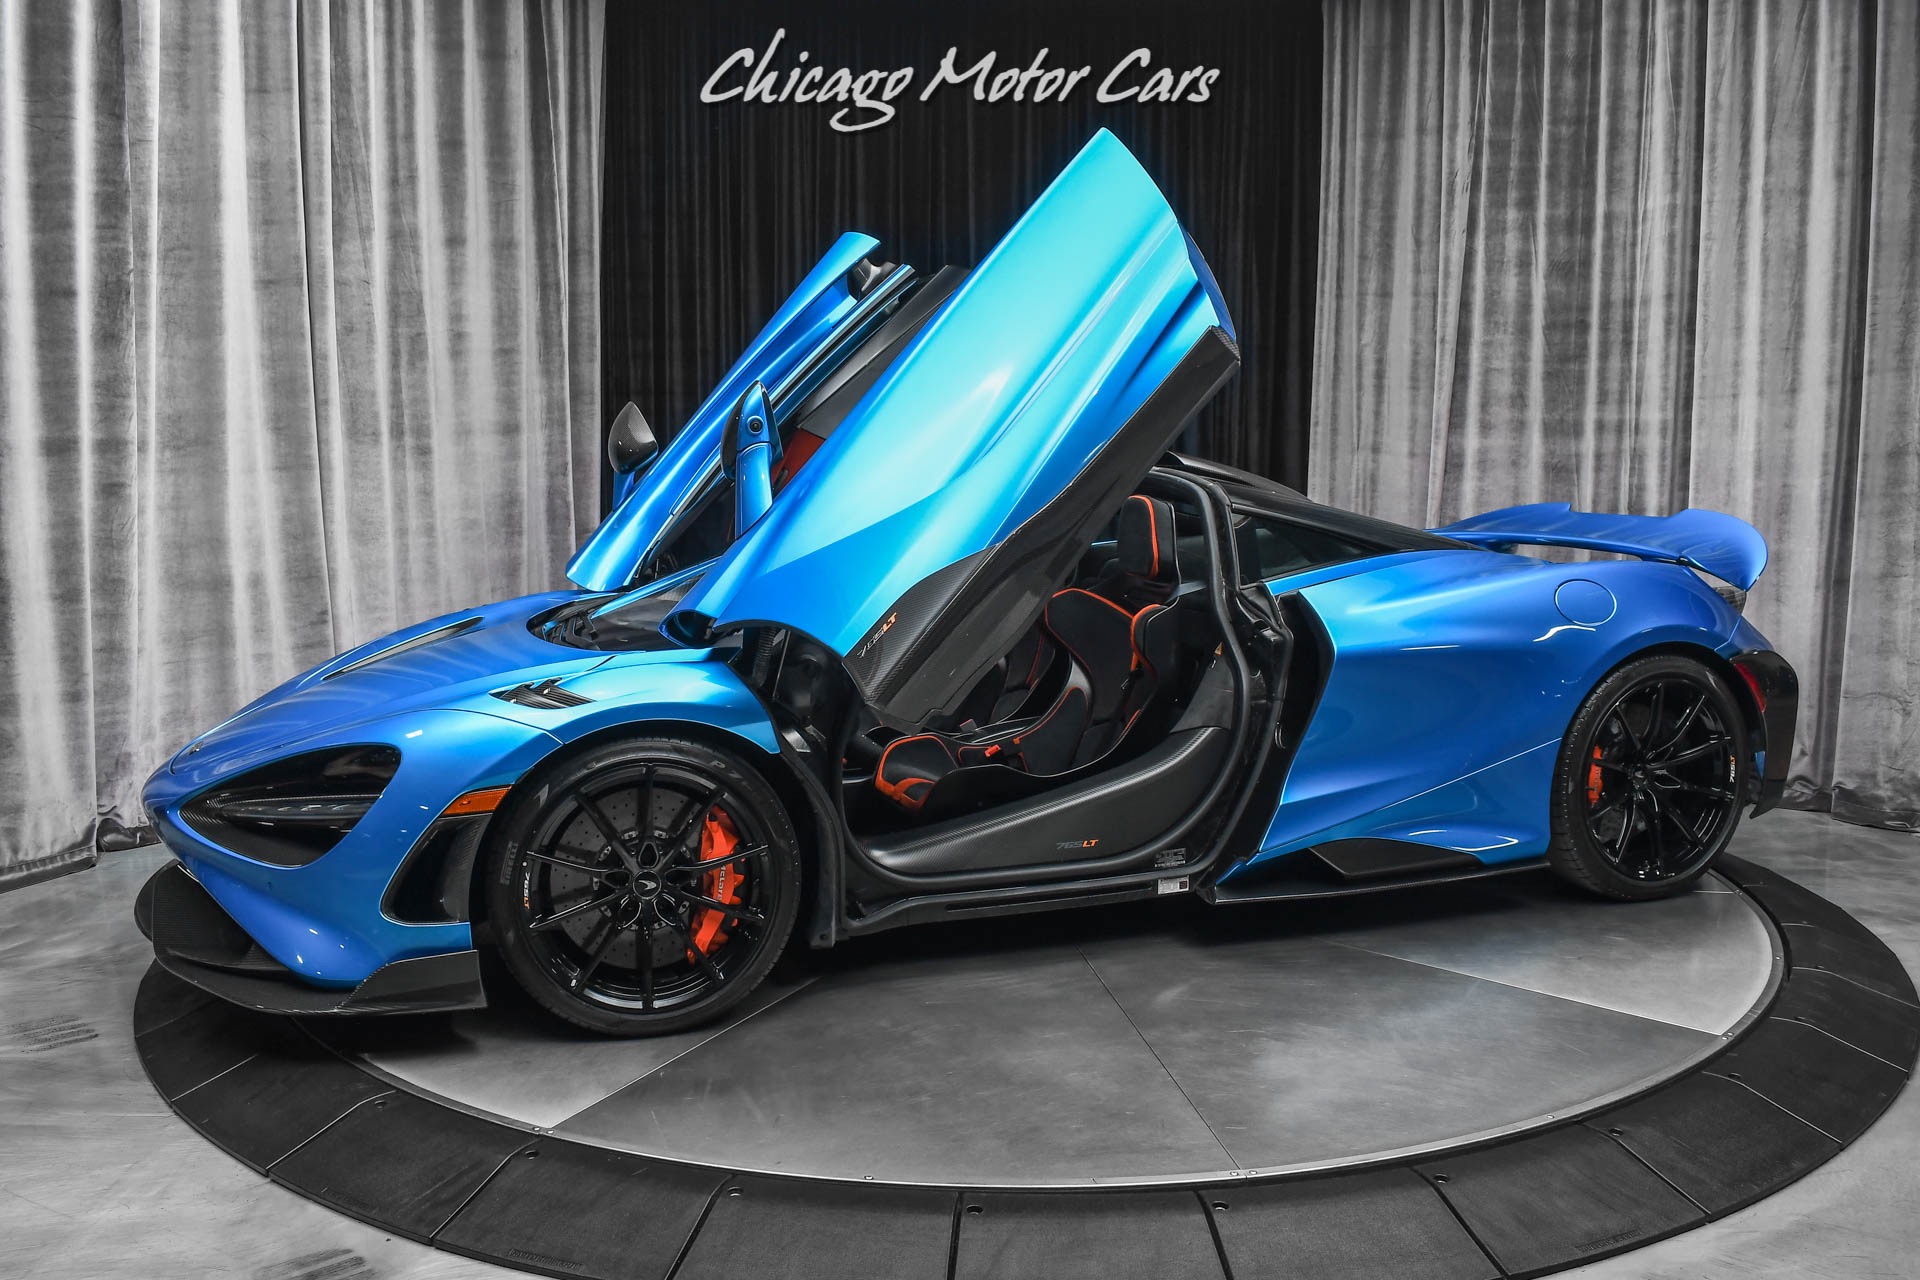 Used-2021-McLaren-765LT-Coupe-MSO-Roof-Scoop-Extremely-RARE-HIGHLY-Optioned-Serviced-LOADED